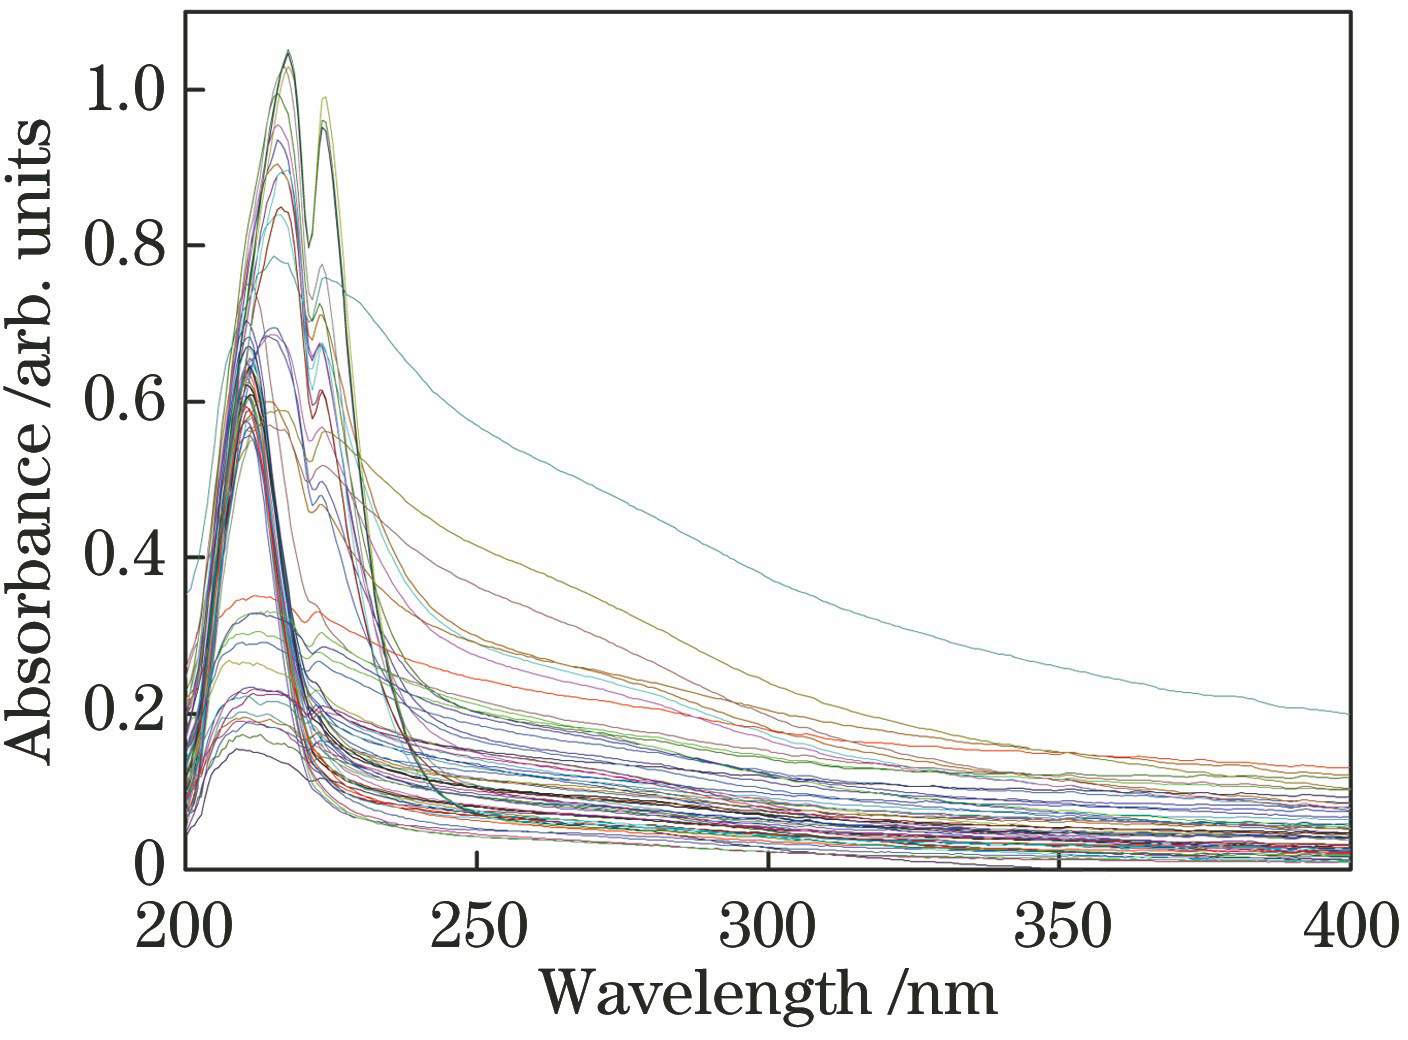 UV absorption spectra of experimental water samples